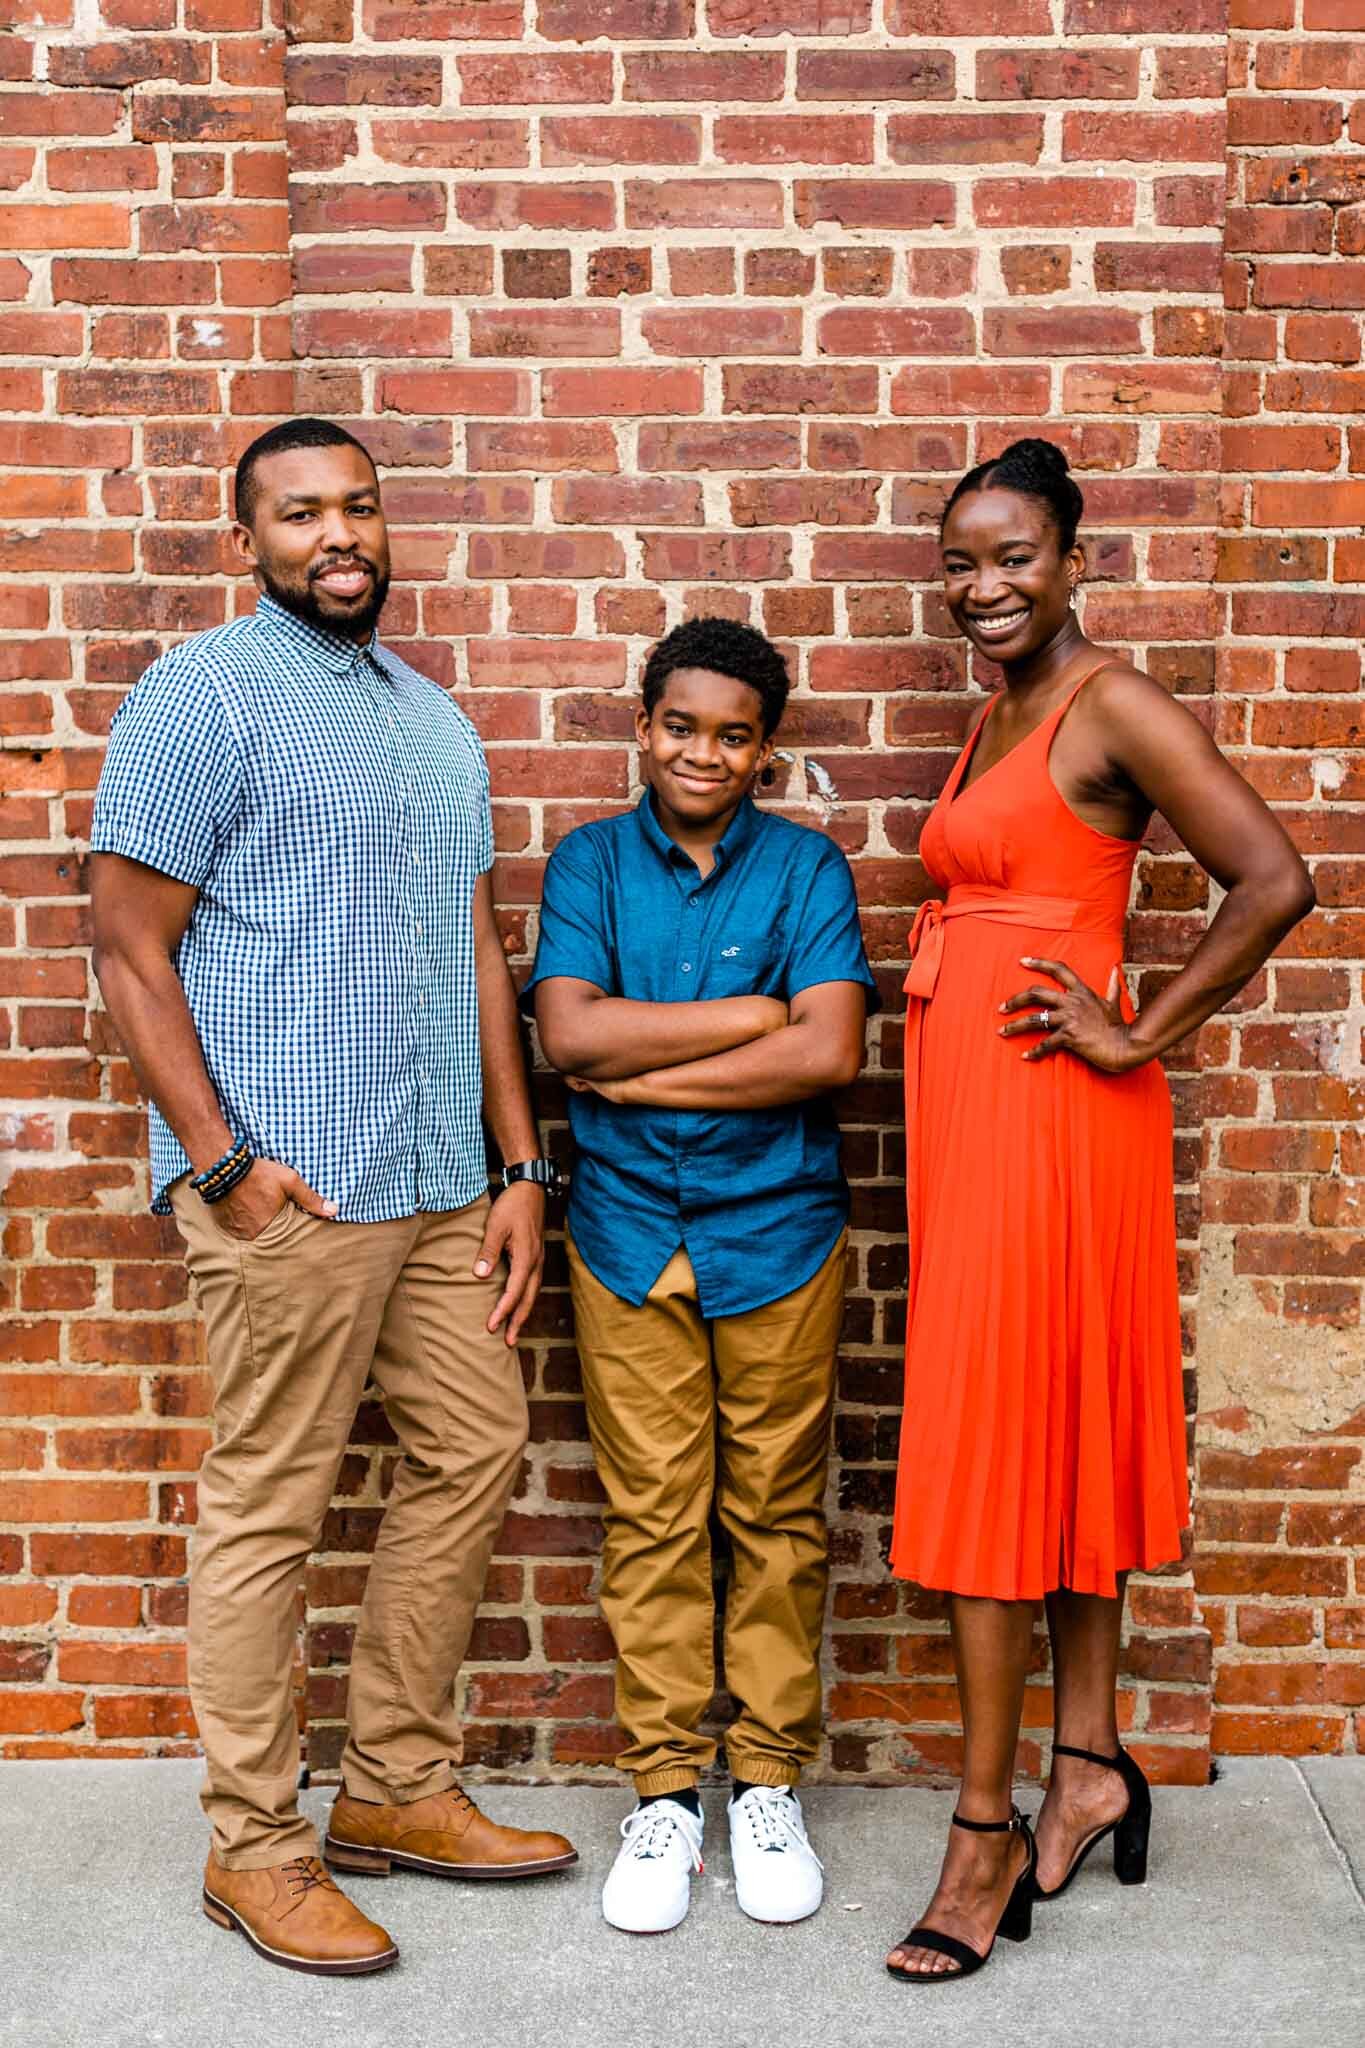 Durham Family Photographer | By G. Lin Photography | Man and woman standing next to young boy